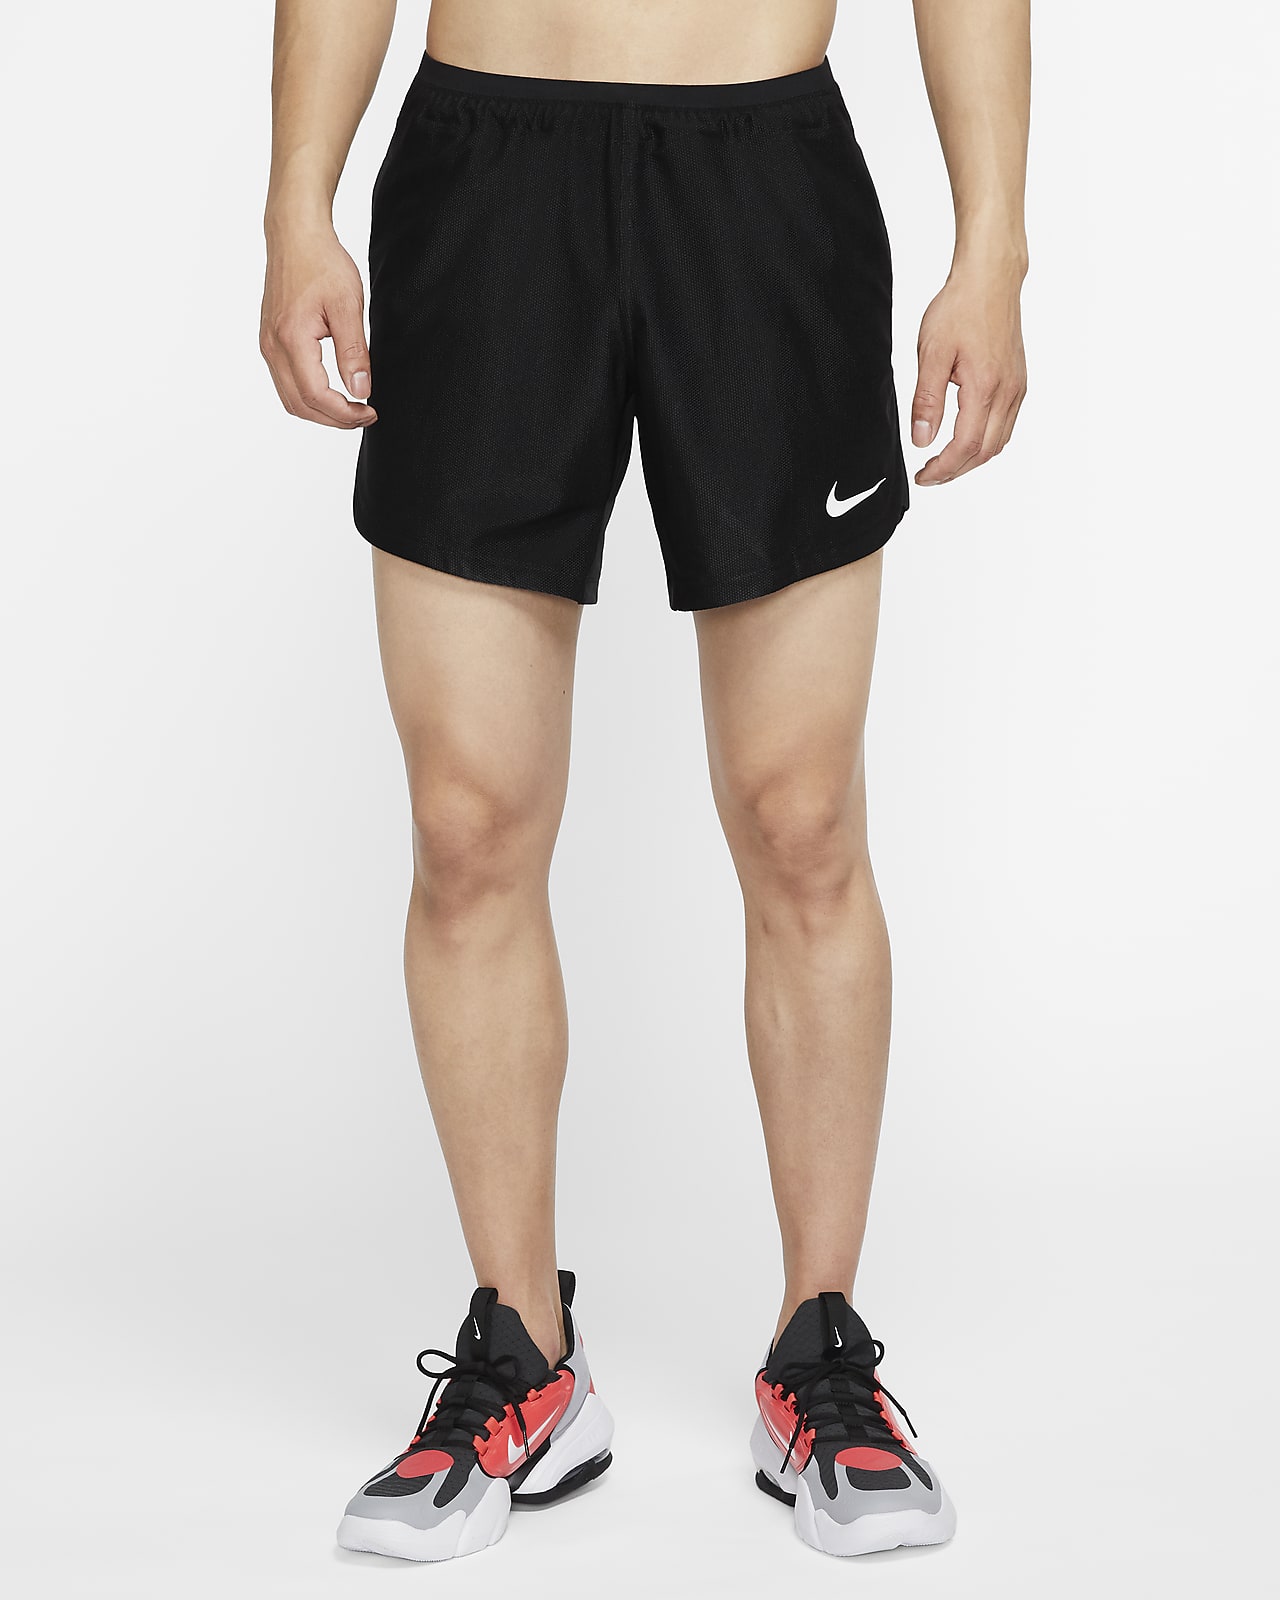 where can you buy nike pro shorts